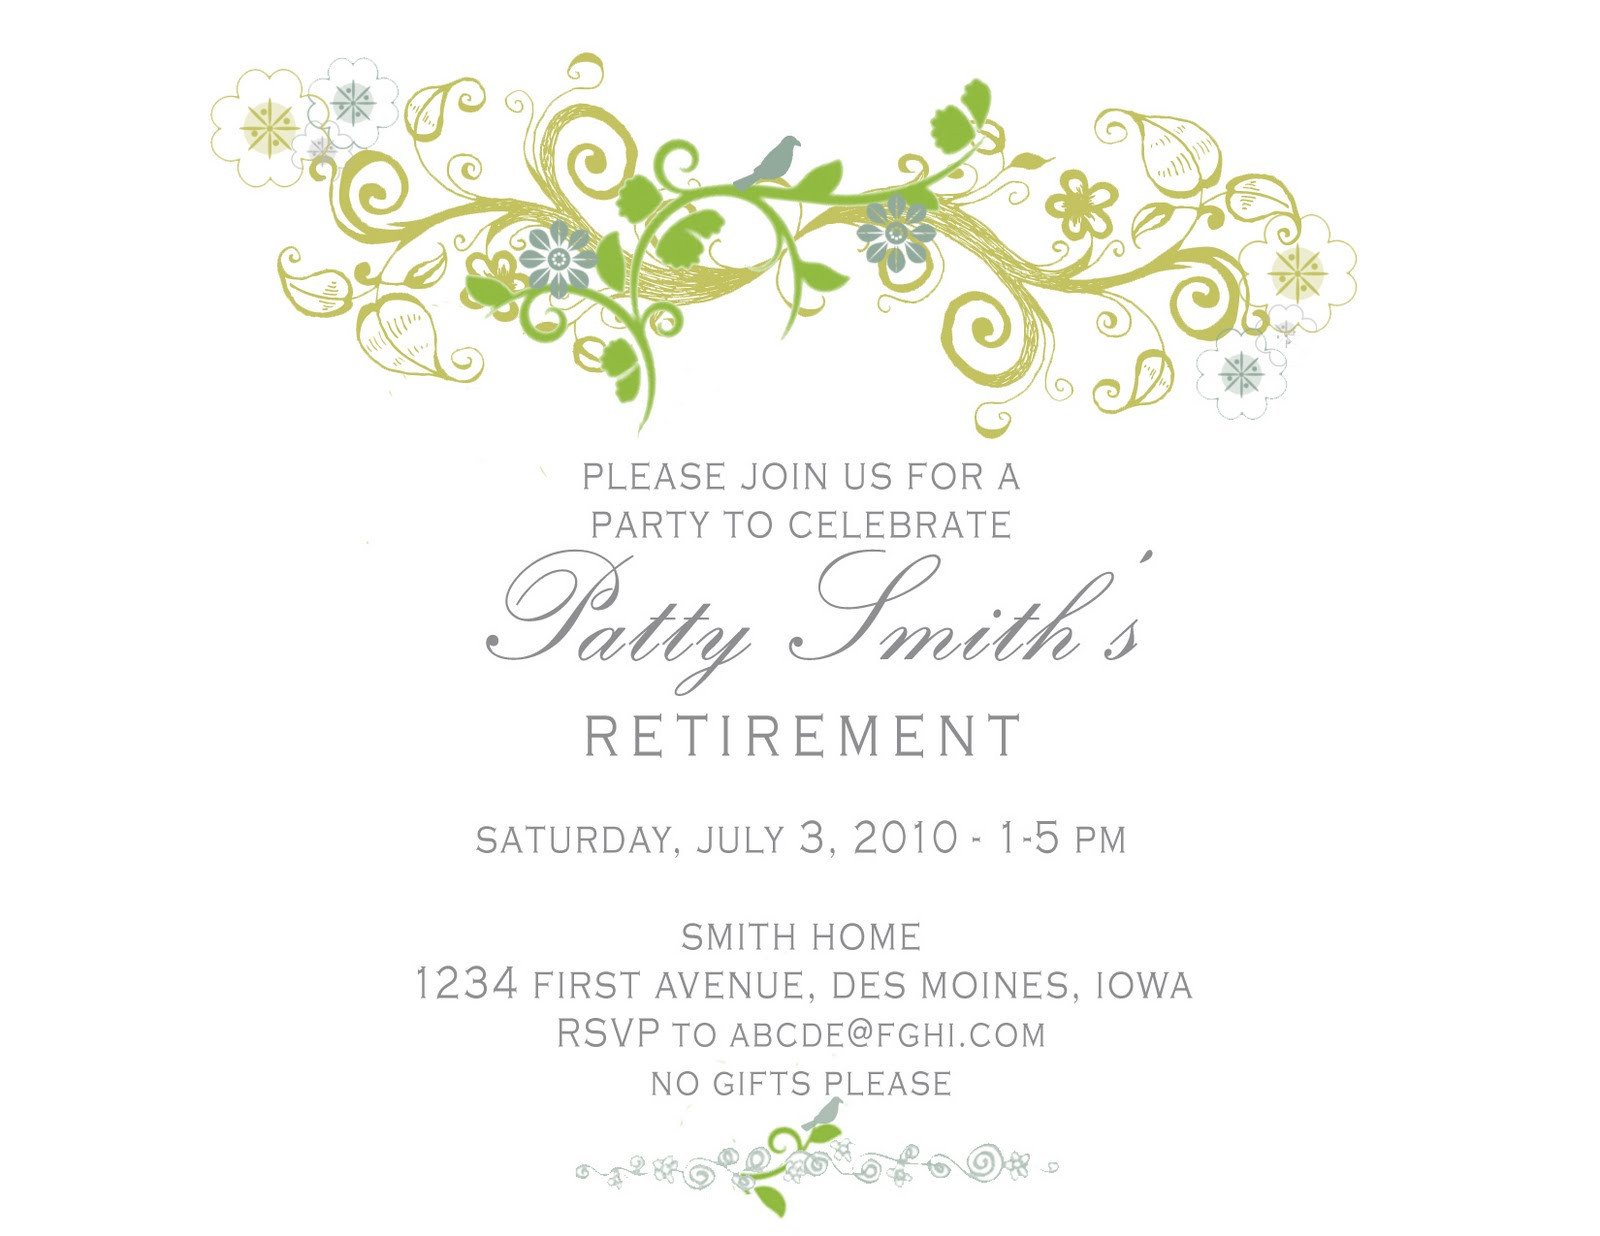 Retirement Party Invitations Template Idesign A Retirement Party Invitation